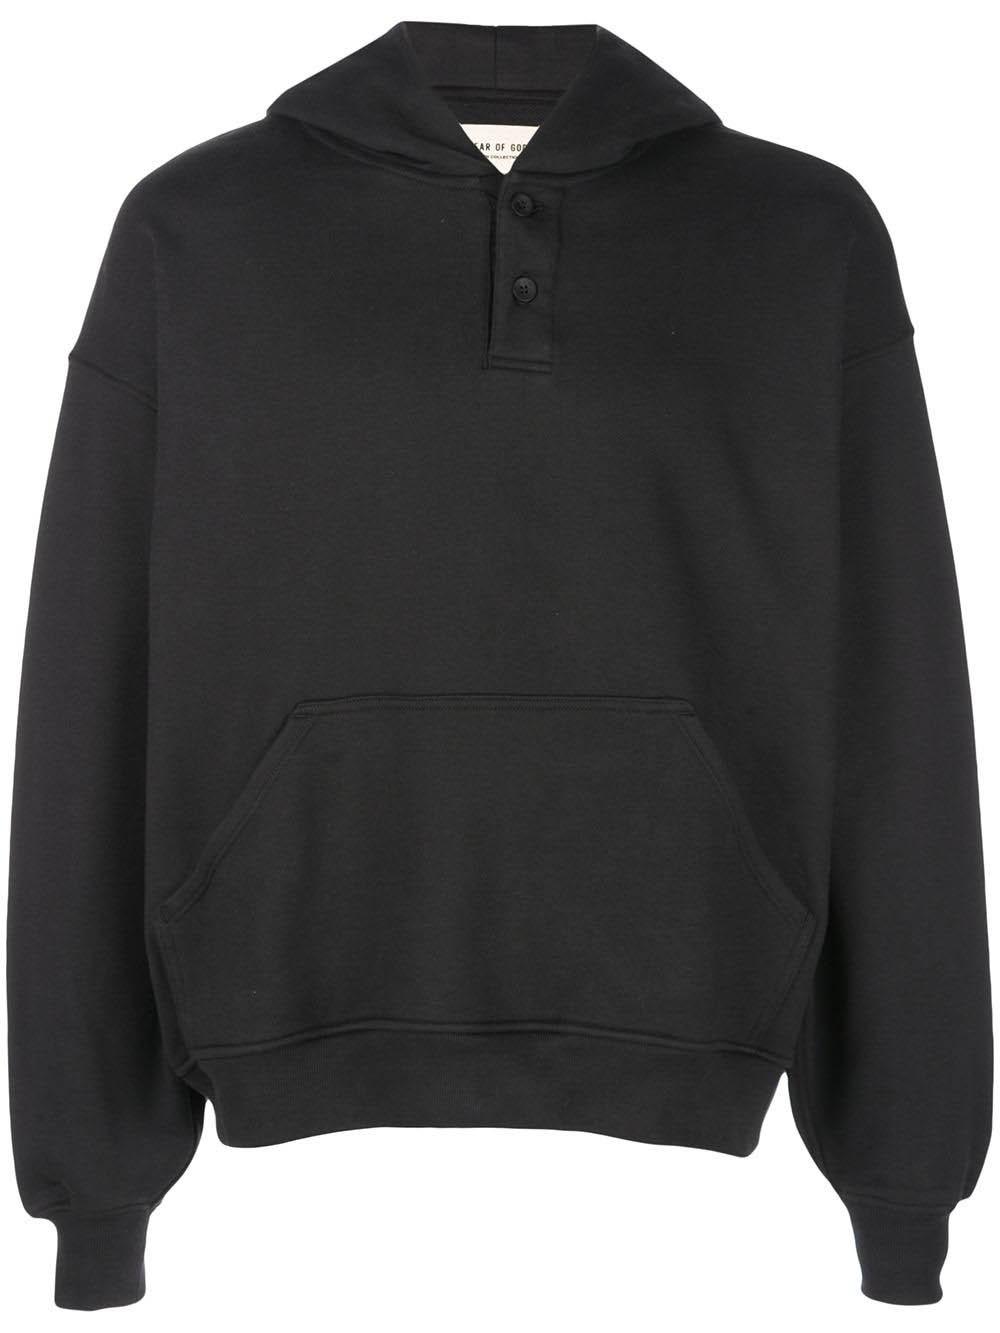 Fear Of God Everyday Henley Hoodie in Black for Men - Lyst